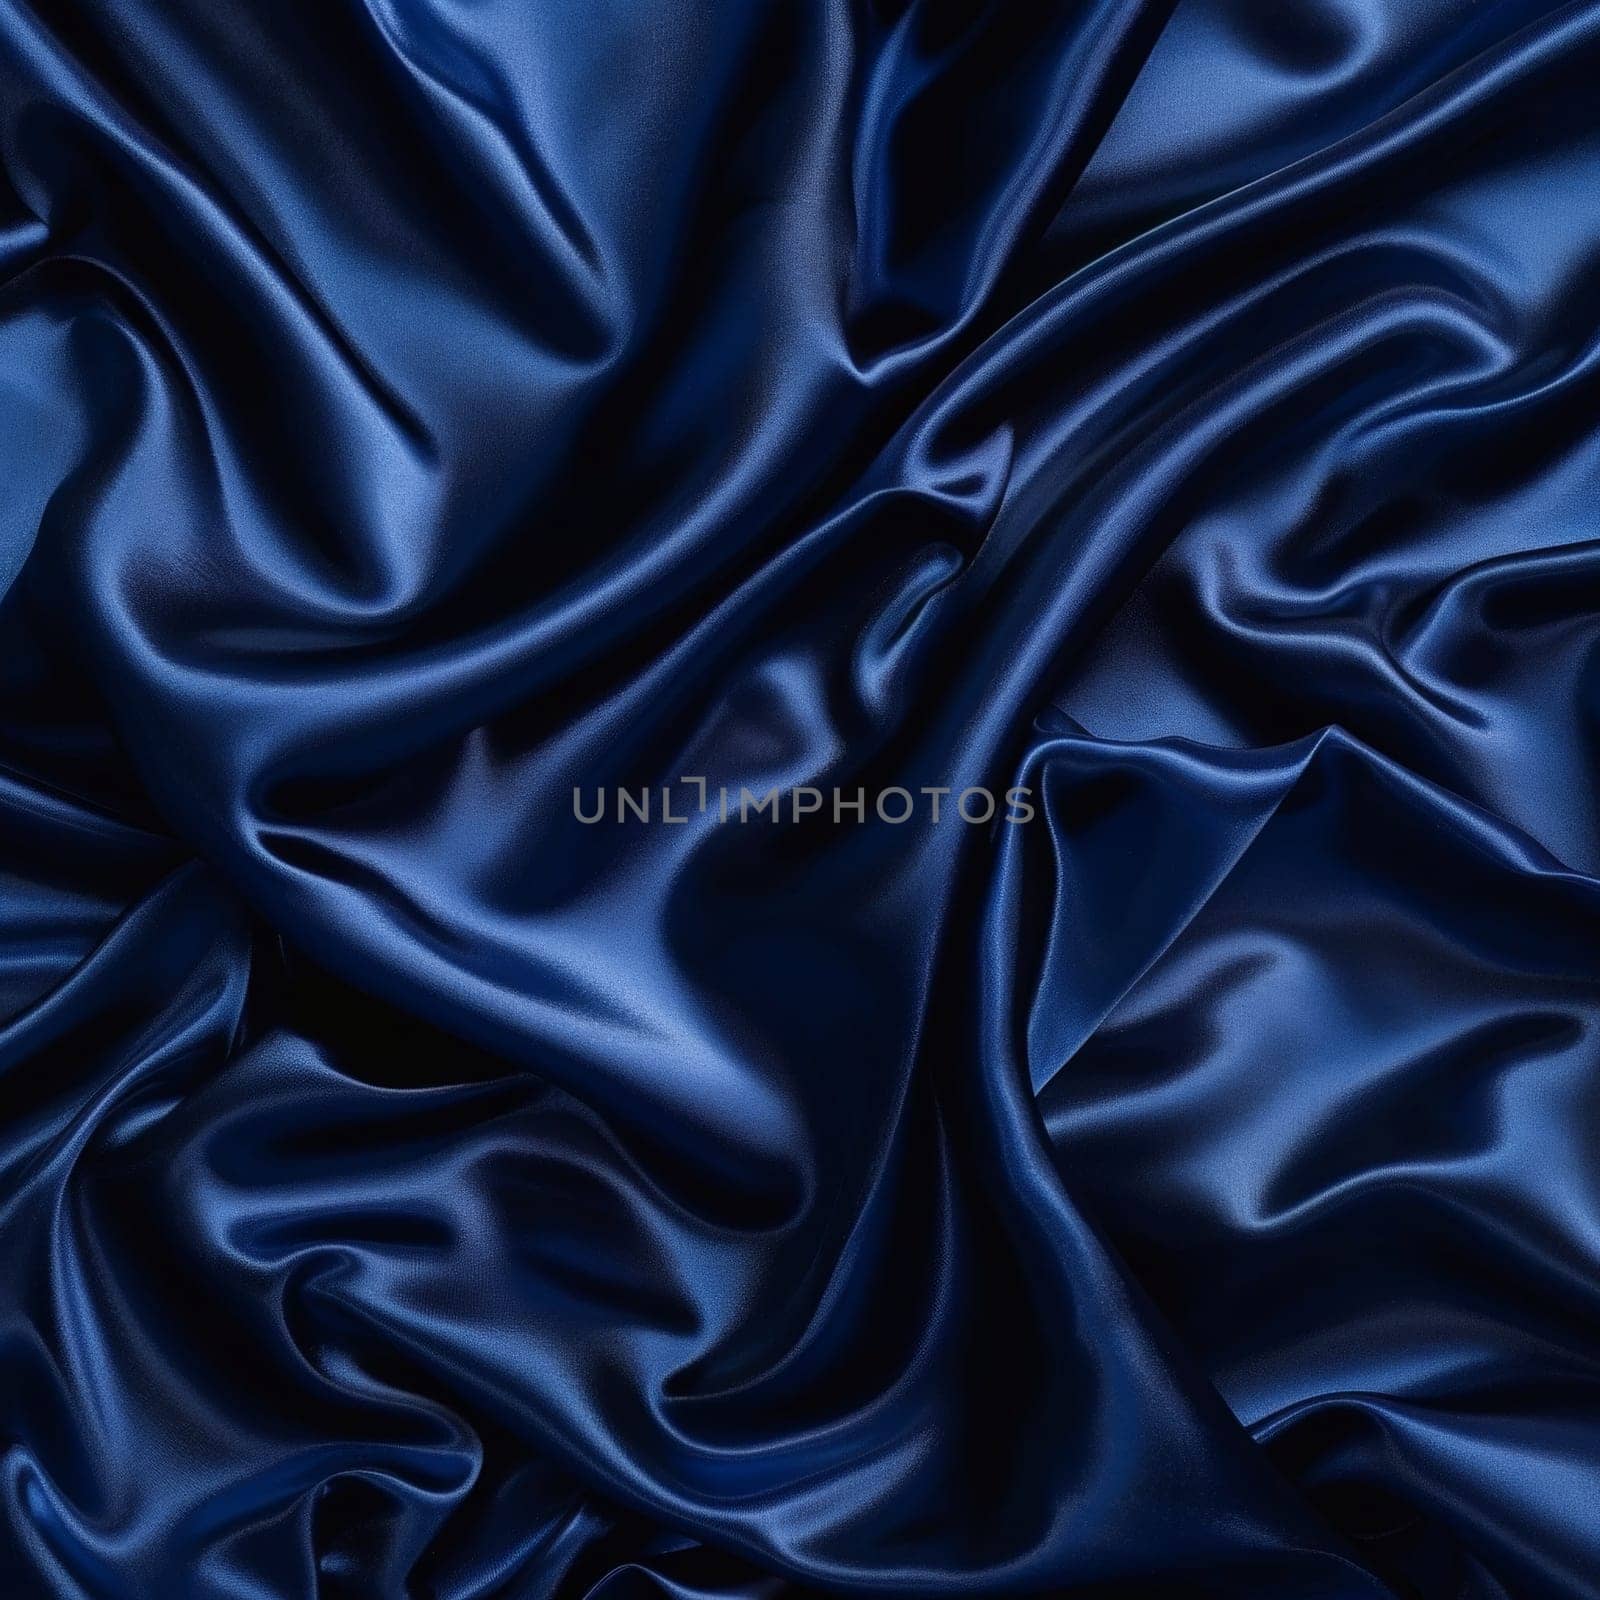 Billowing waves of indigo blue fabric have a rich, velvety texture that evokes a sense of luxury and opulence. by sfinks